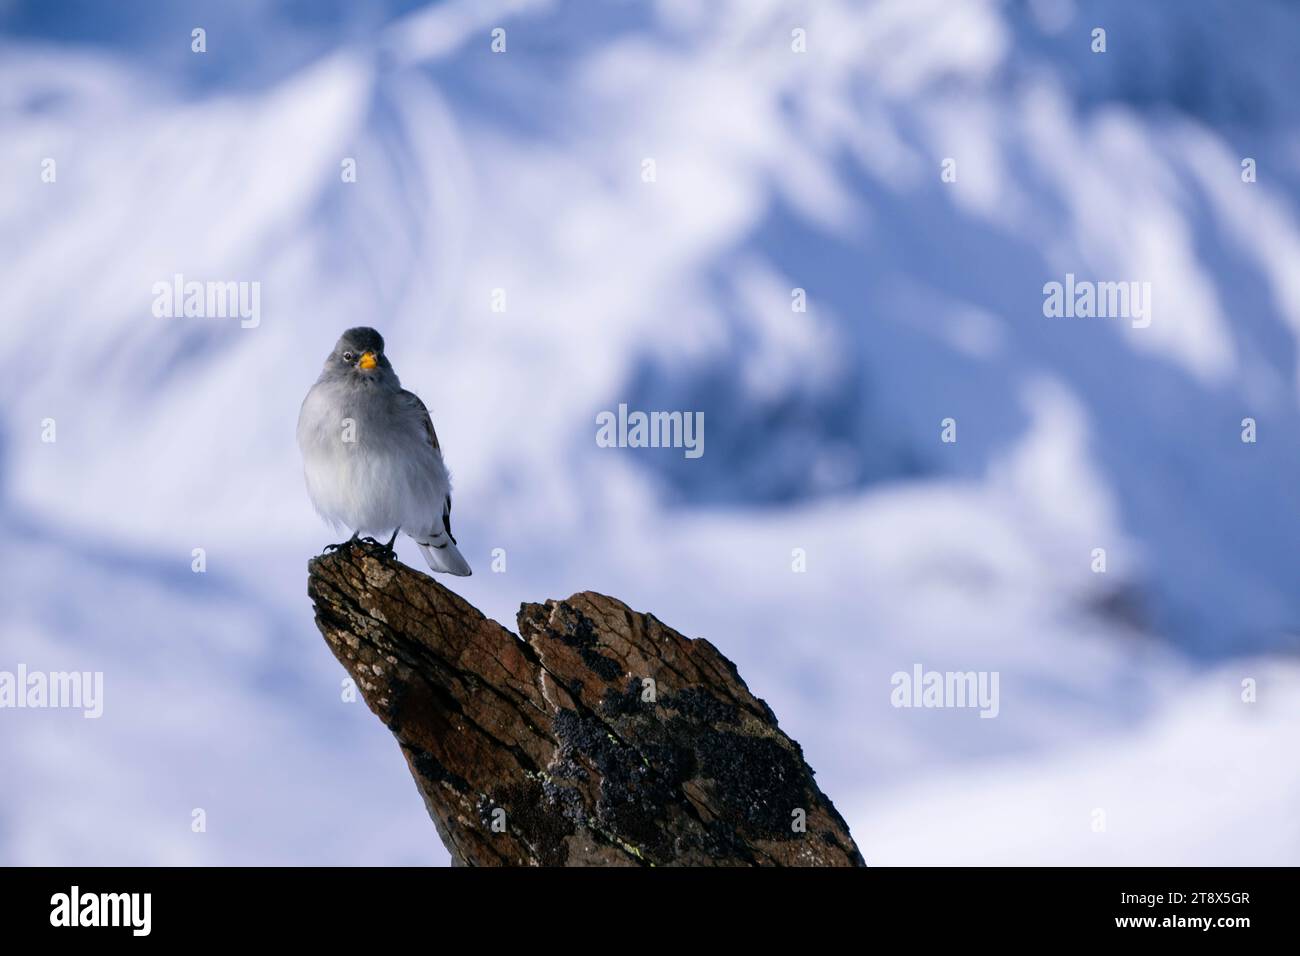 A white-gray bird with a yellow beak perches on a broken tree stump that resembles a rock, set against a backdrop of snow-covered mountains. France Stock Photo